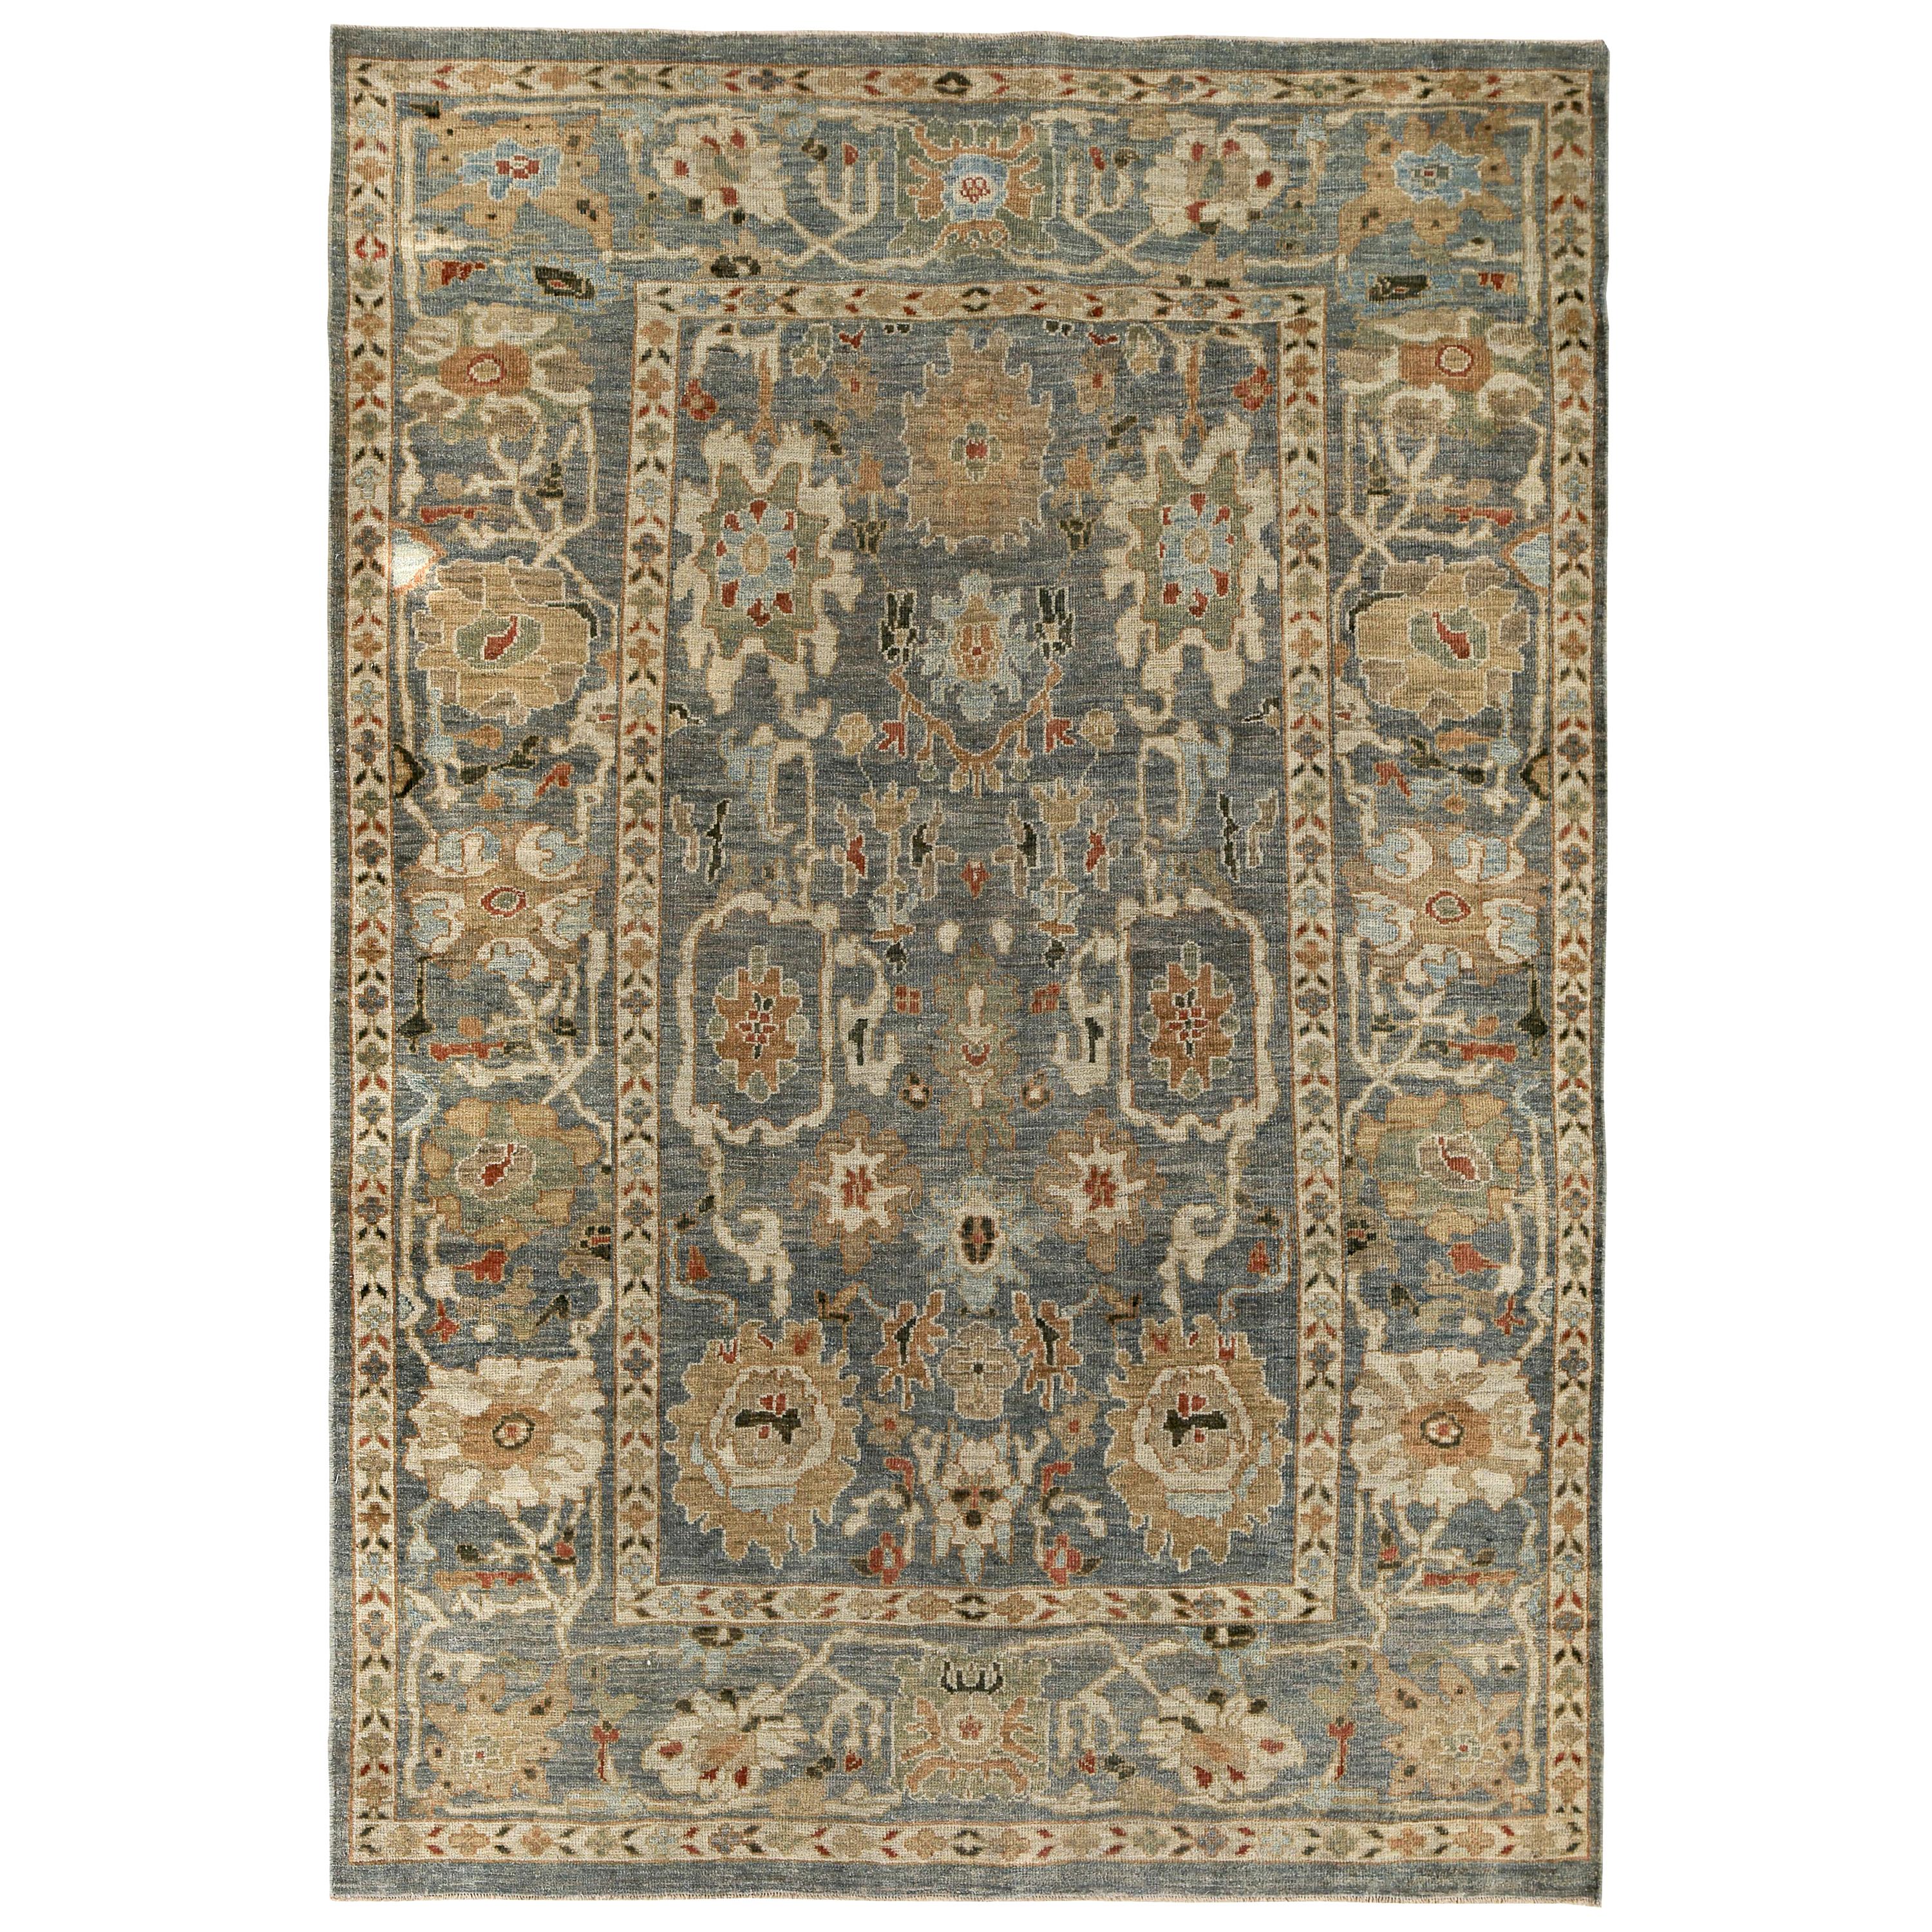 Turkish Rug Sultanabad Style with Brown and Ivory Botanical Details For Sale